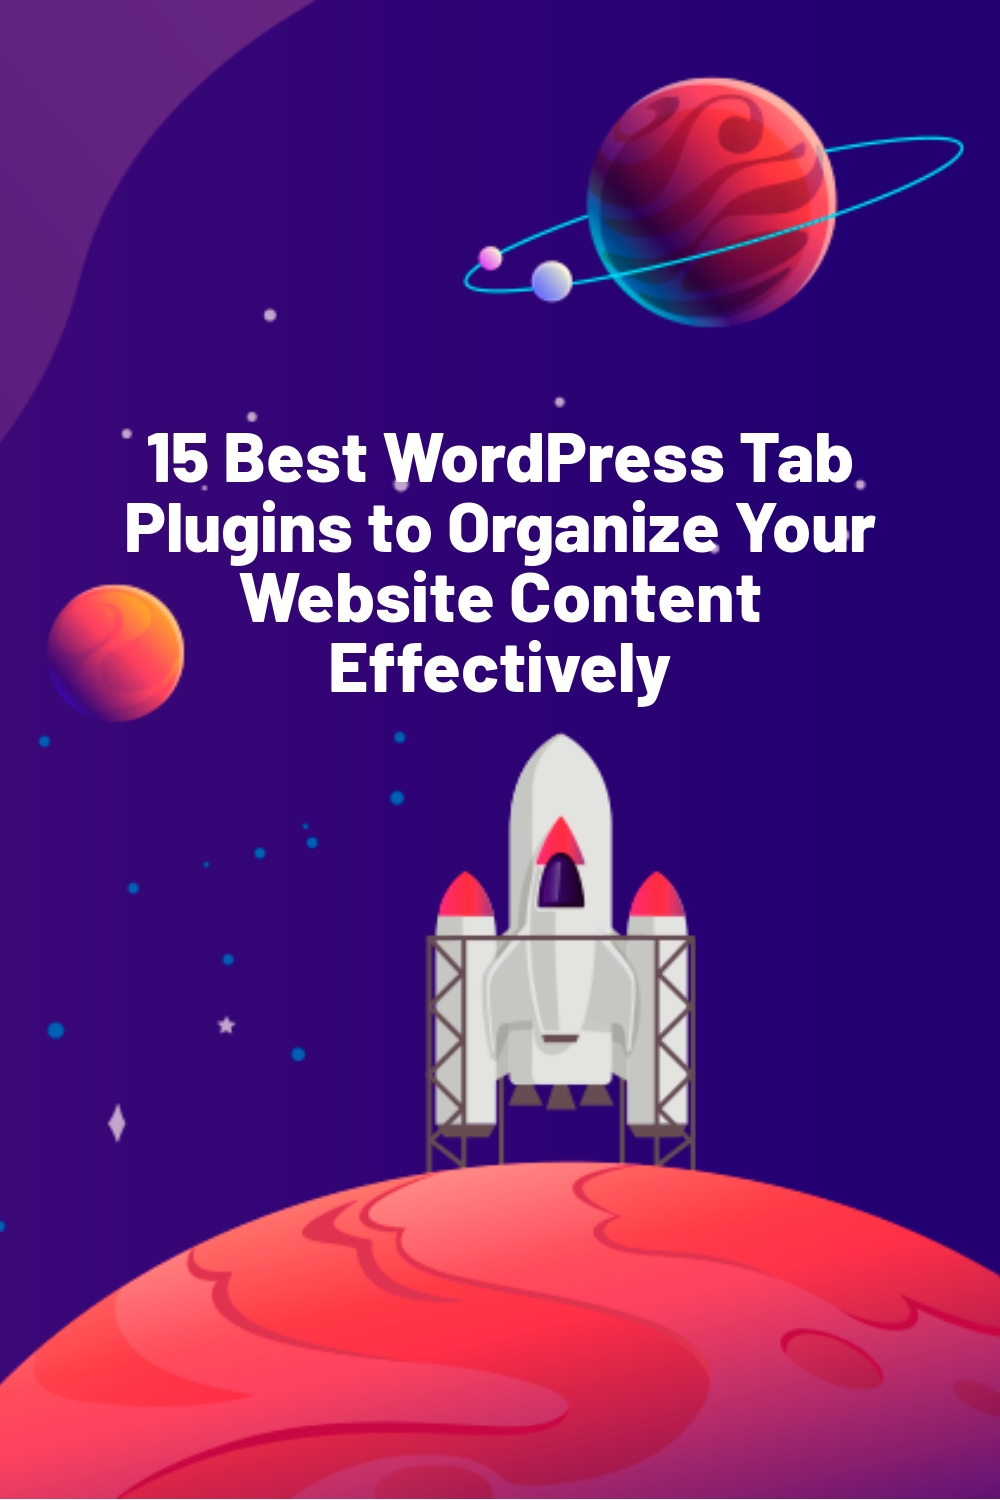 15 Best WordPress Tab Plugins to Organize Your Website Content Effectively